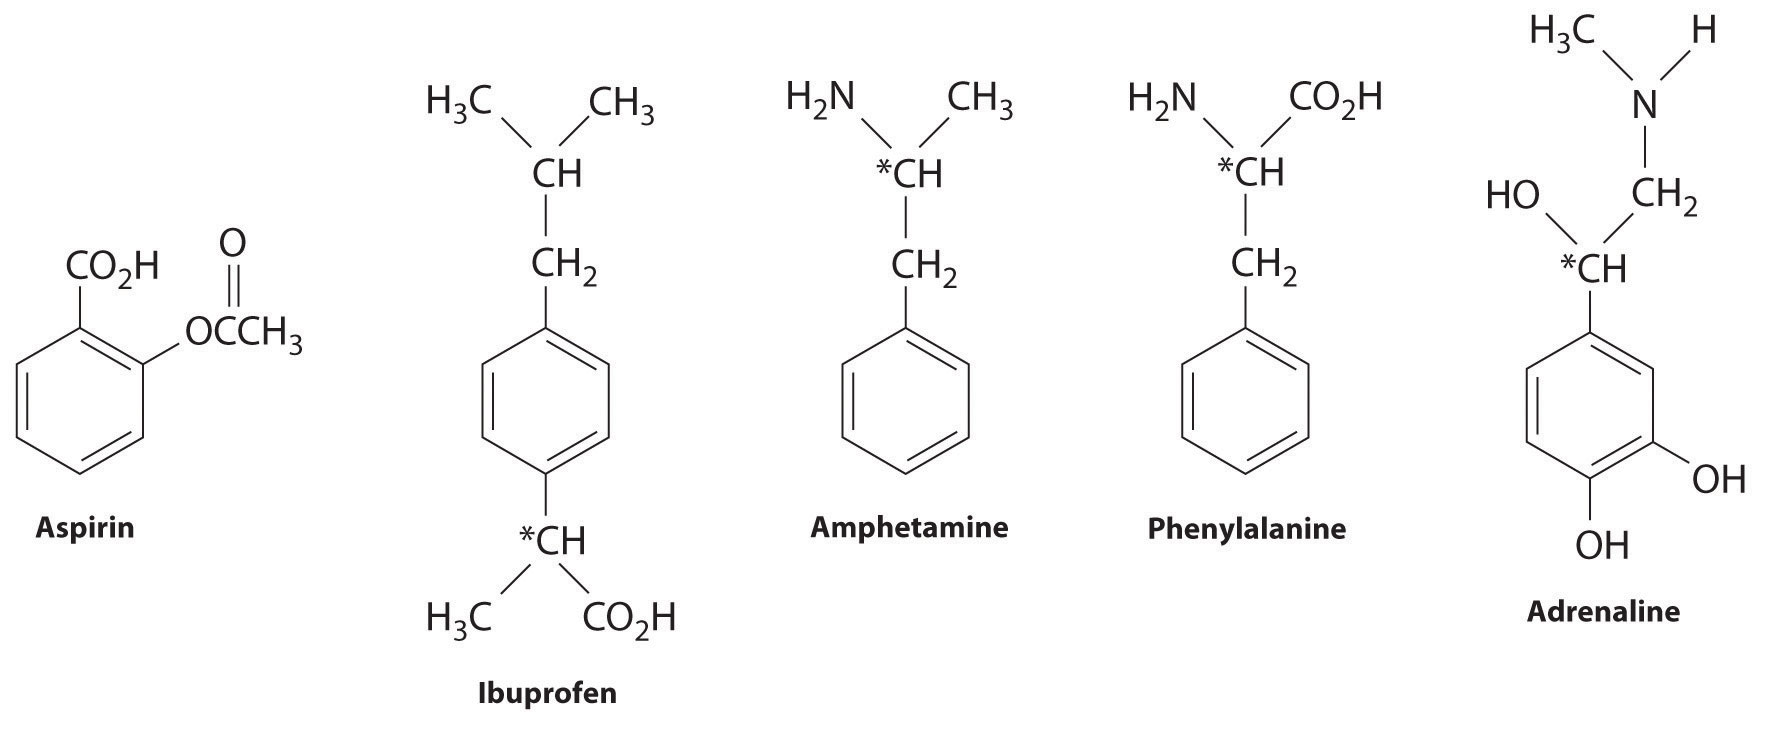 organic compounds list and uses